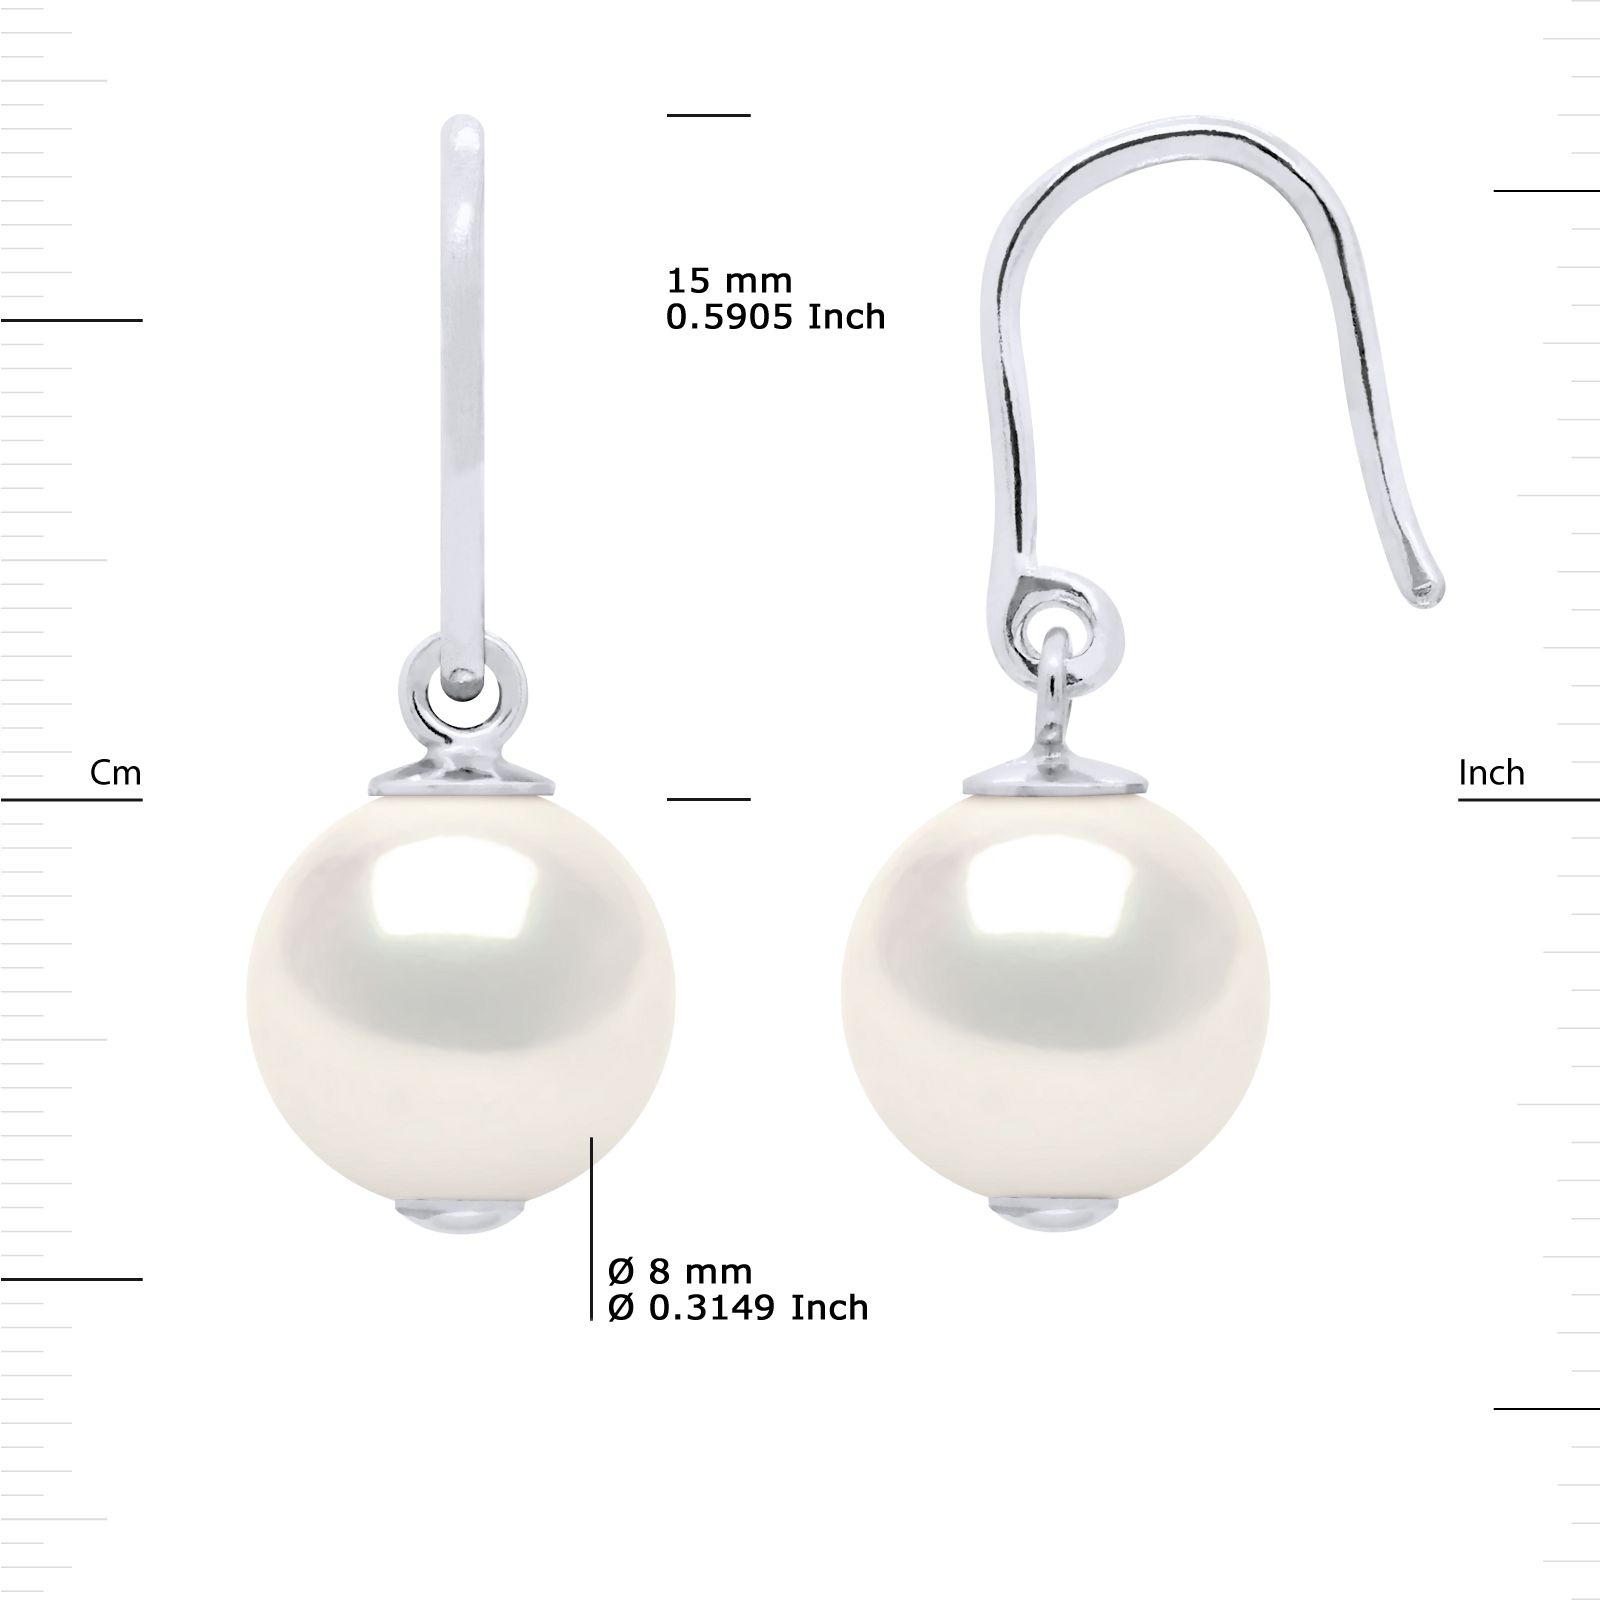 Earrings of 925 Sterling Silver and true Cultured Freshwater Pearls 8-9 mm , 0,31 in - Natural White Color and Hook system - Our jewellery is made in France and will be delivered in a gift box accompanied by a Certificate of Authenticity and International Warranty